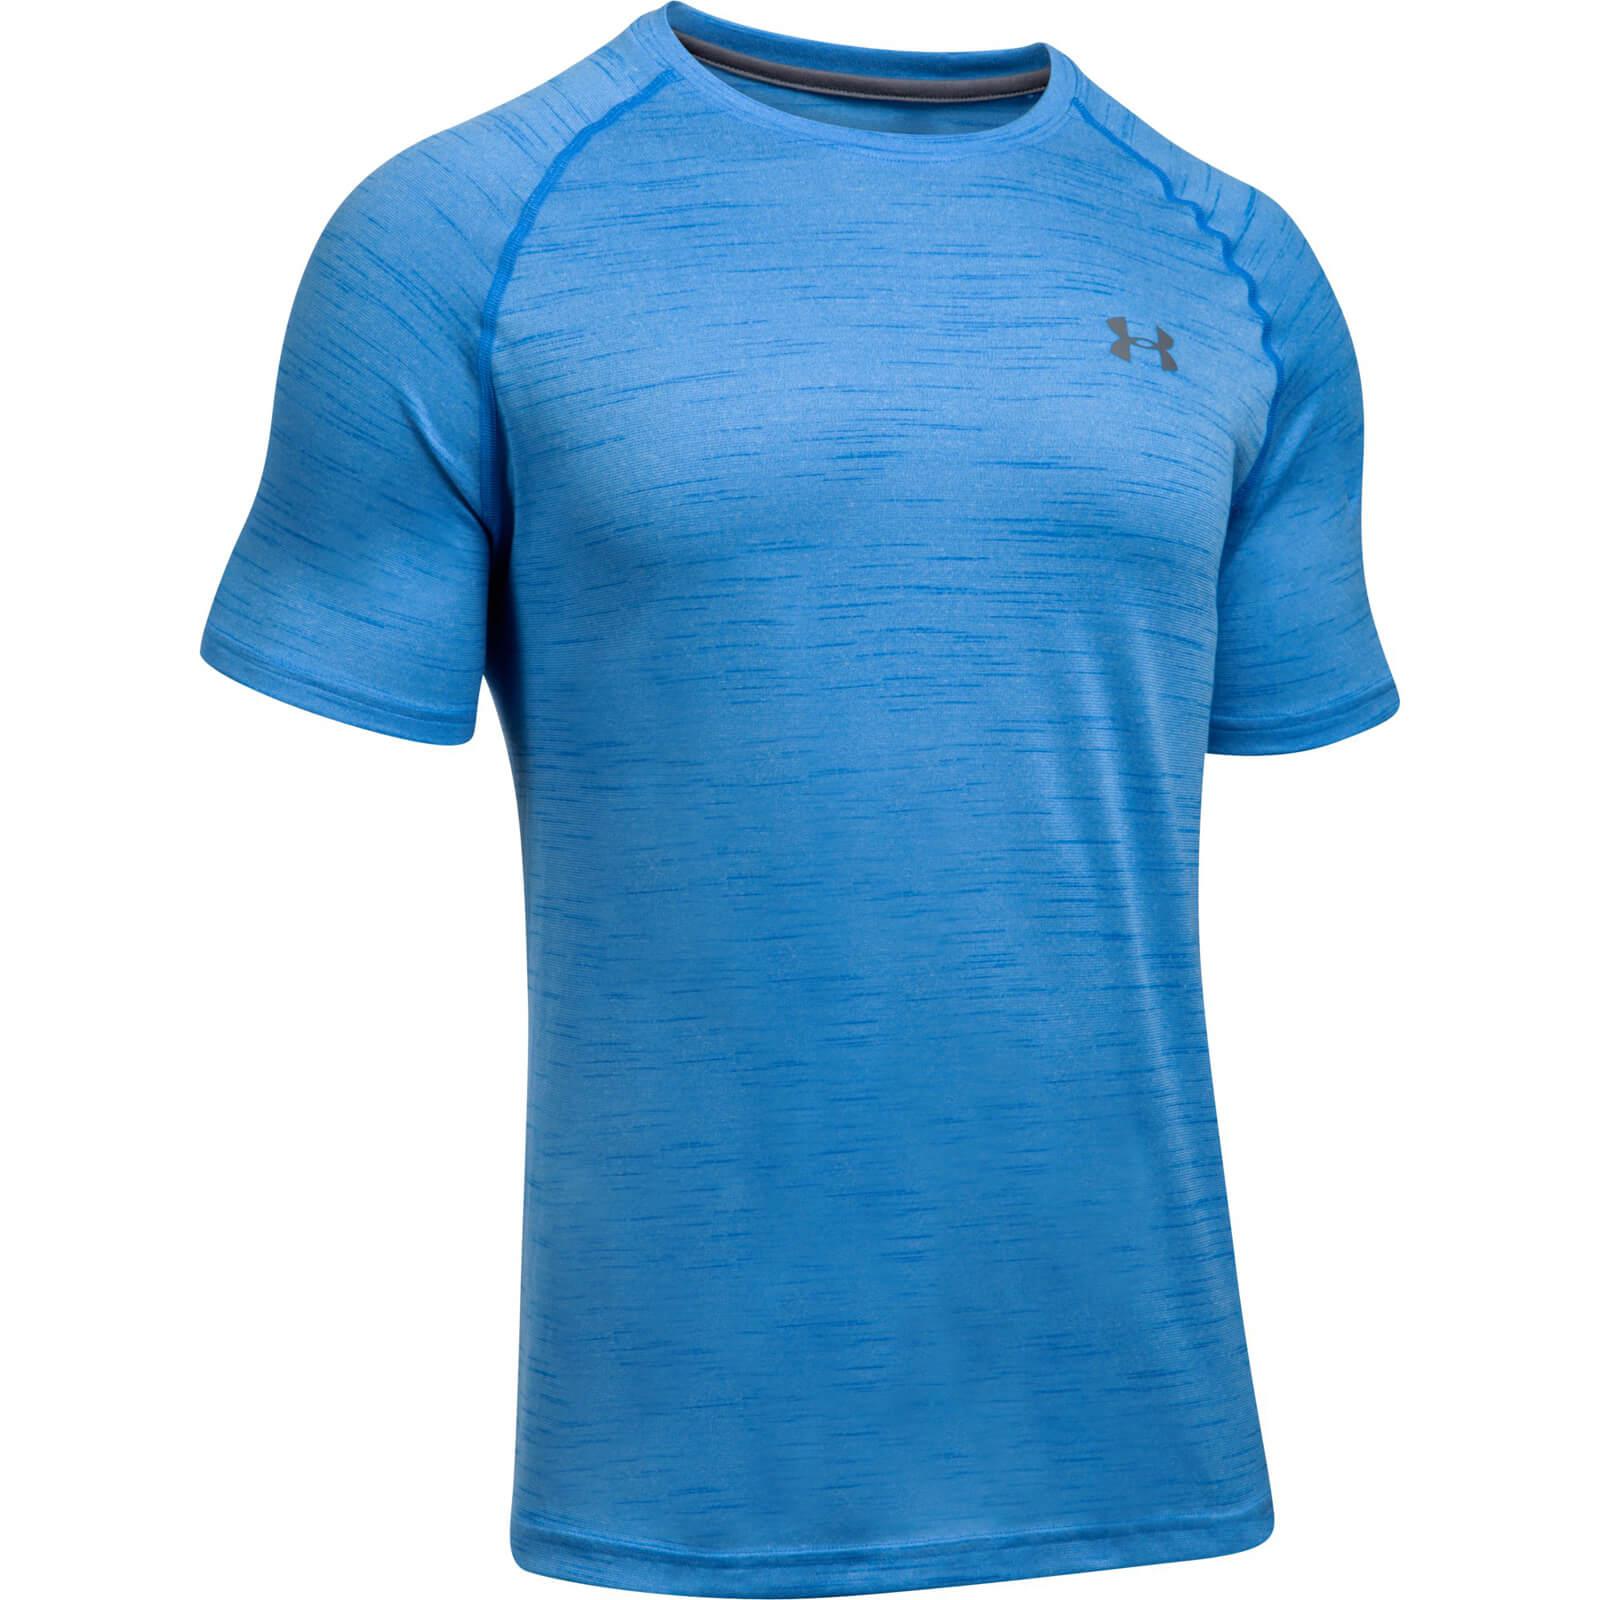 Lyst - Under Armour Tech T-shirt in Blue for Men